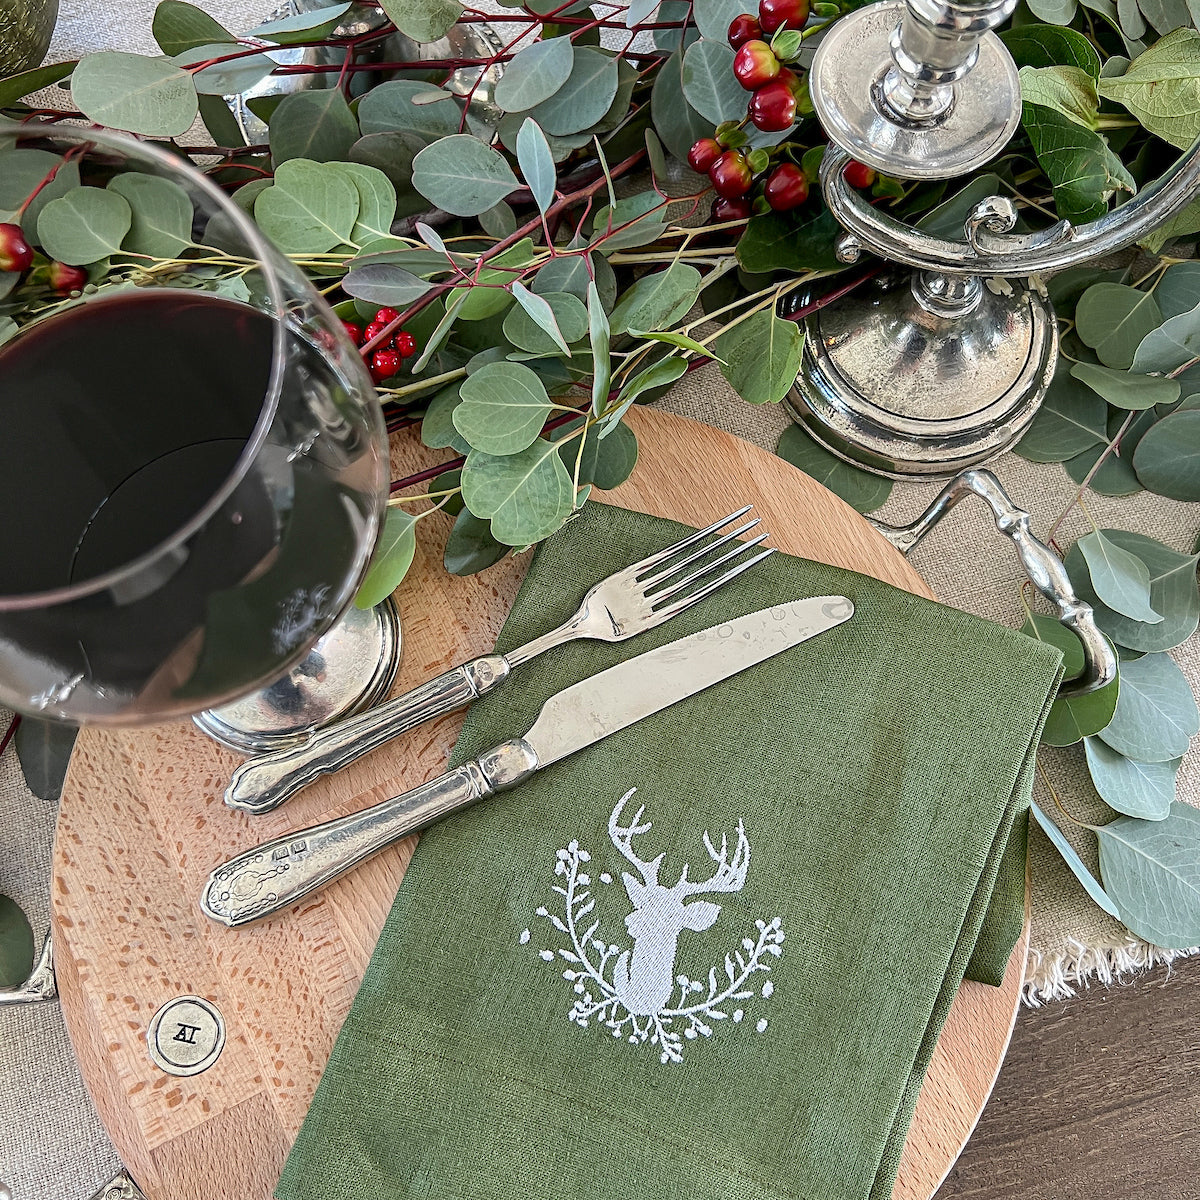 Stag with Holly Berries Linen Towel